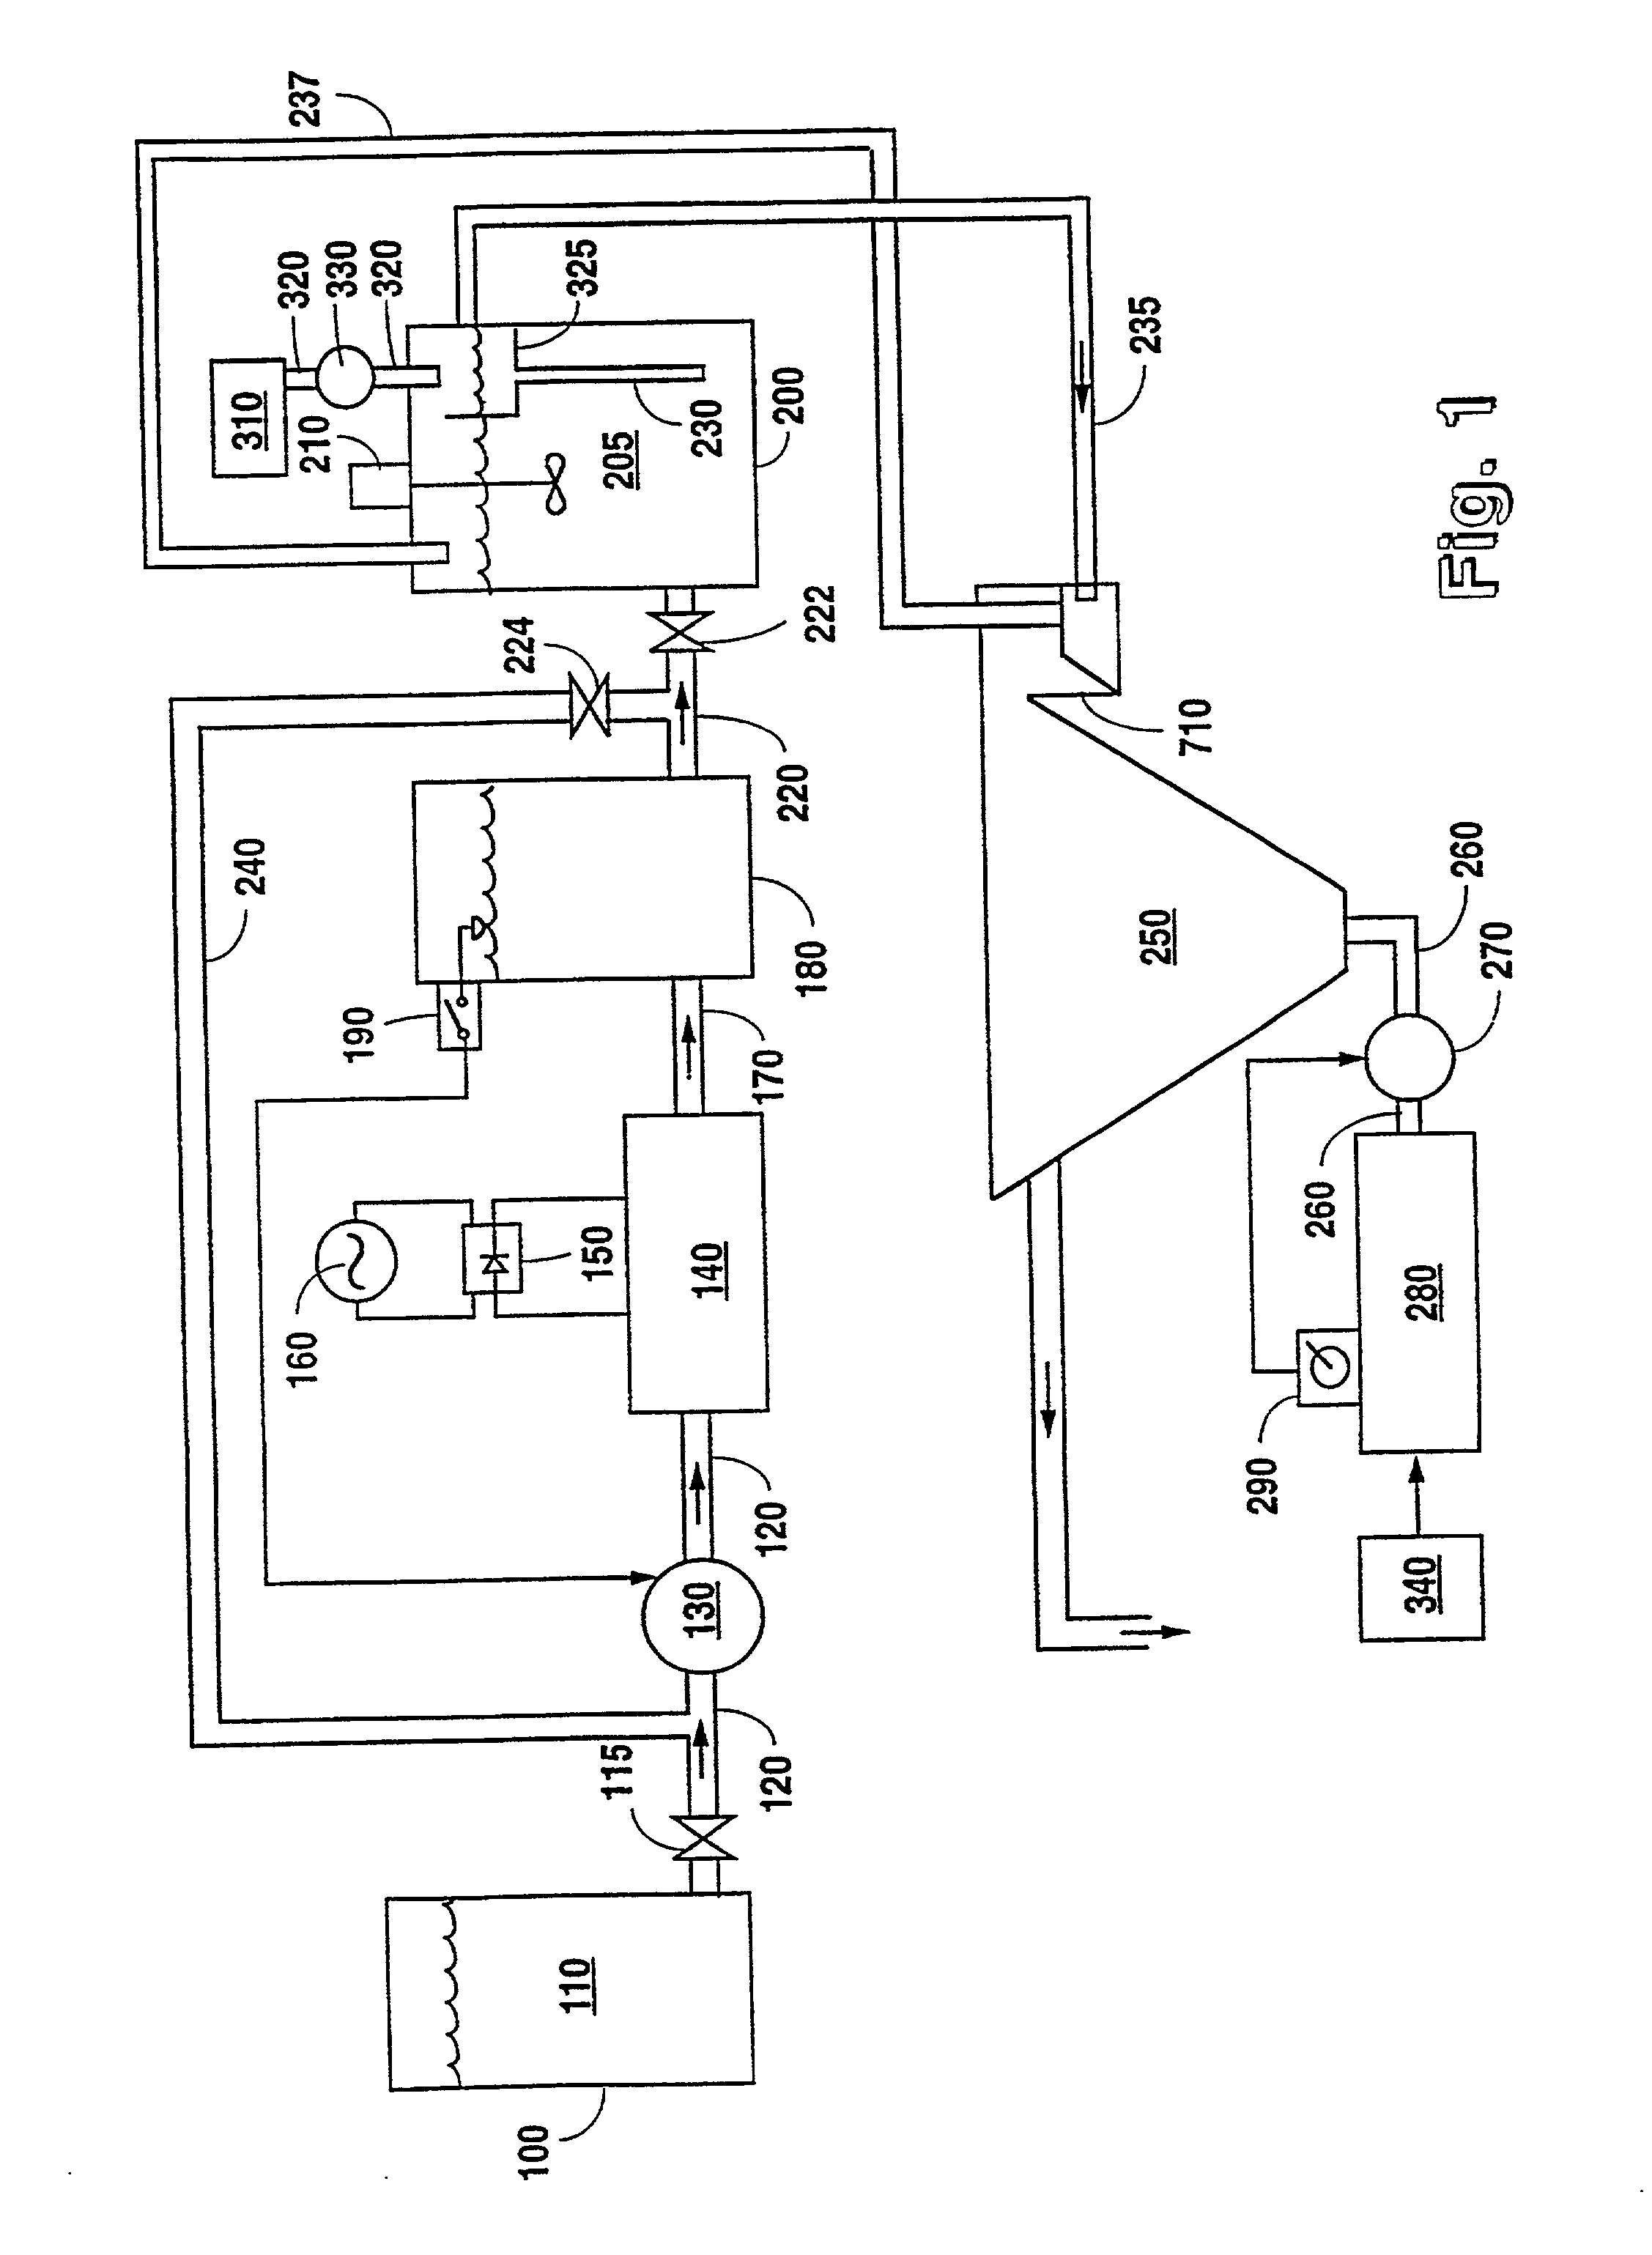 Process and apparatus for electrocoagulative treatment of industrial waste water